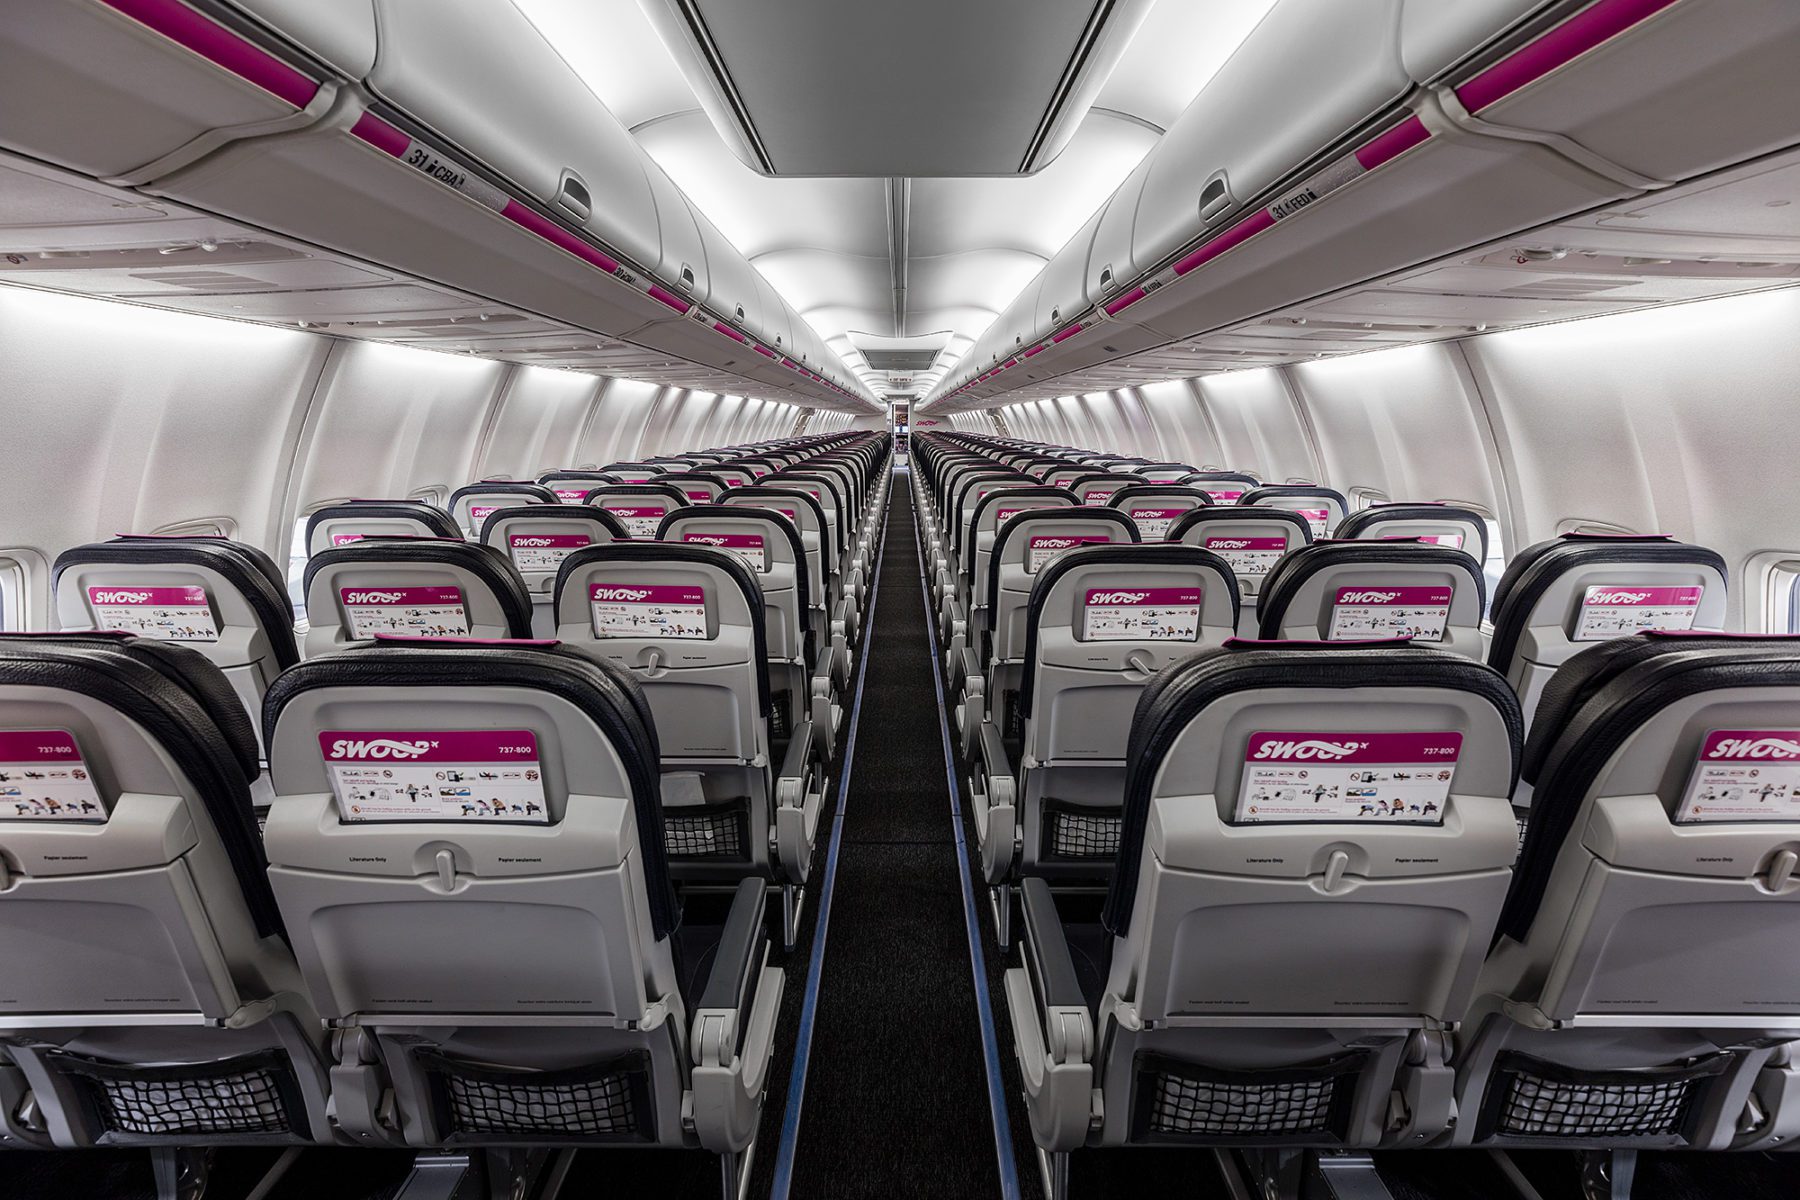 Swoop Airline reviews - Seats on plane